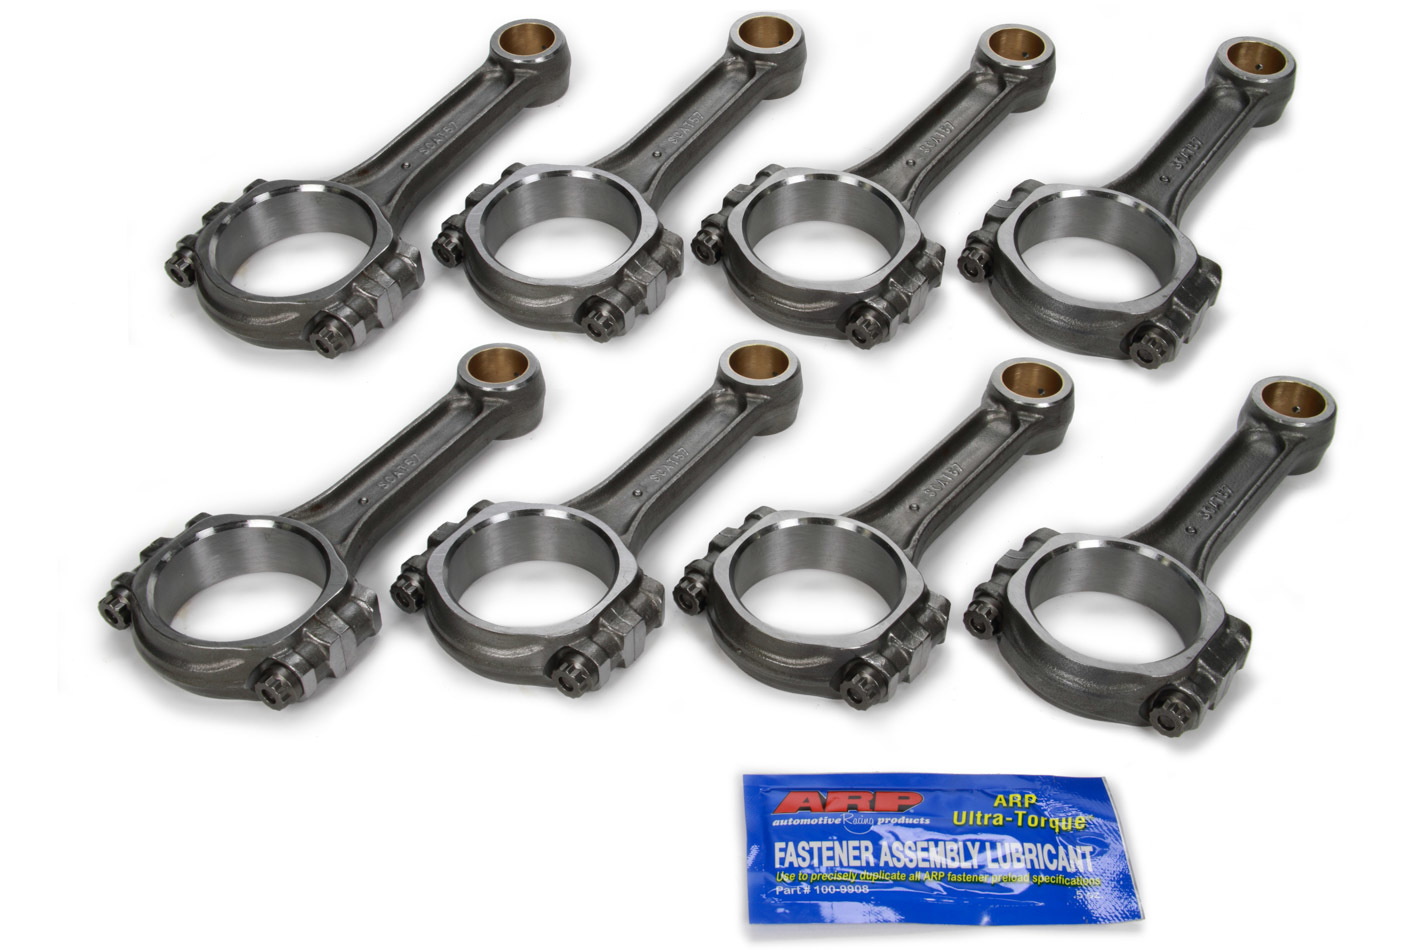 https://www.race-leader.com/images/7a66f0a8-246f-11eb-a7a1-82a52018d910/jpg/sbc-4340-forged-i-beam-rods-5700/sca-2-icr5700a-1.jpg